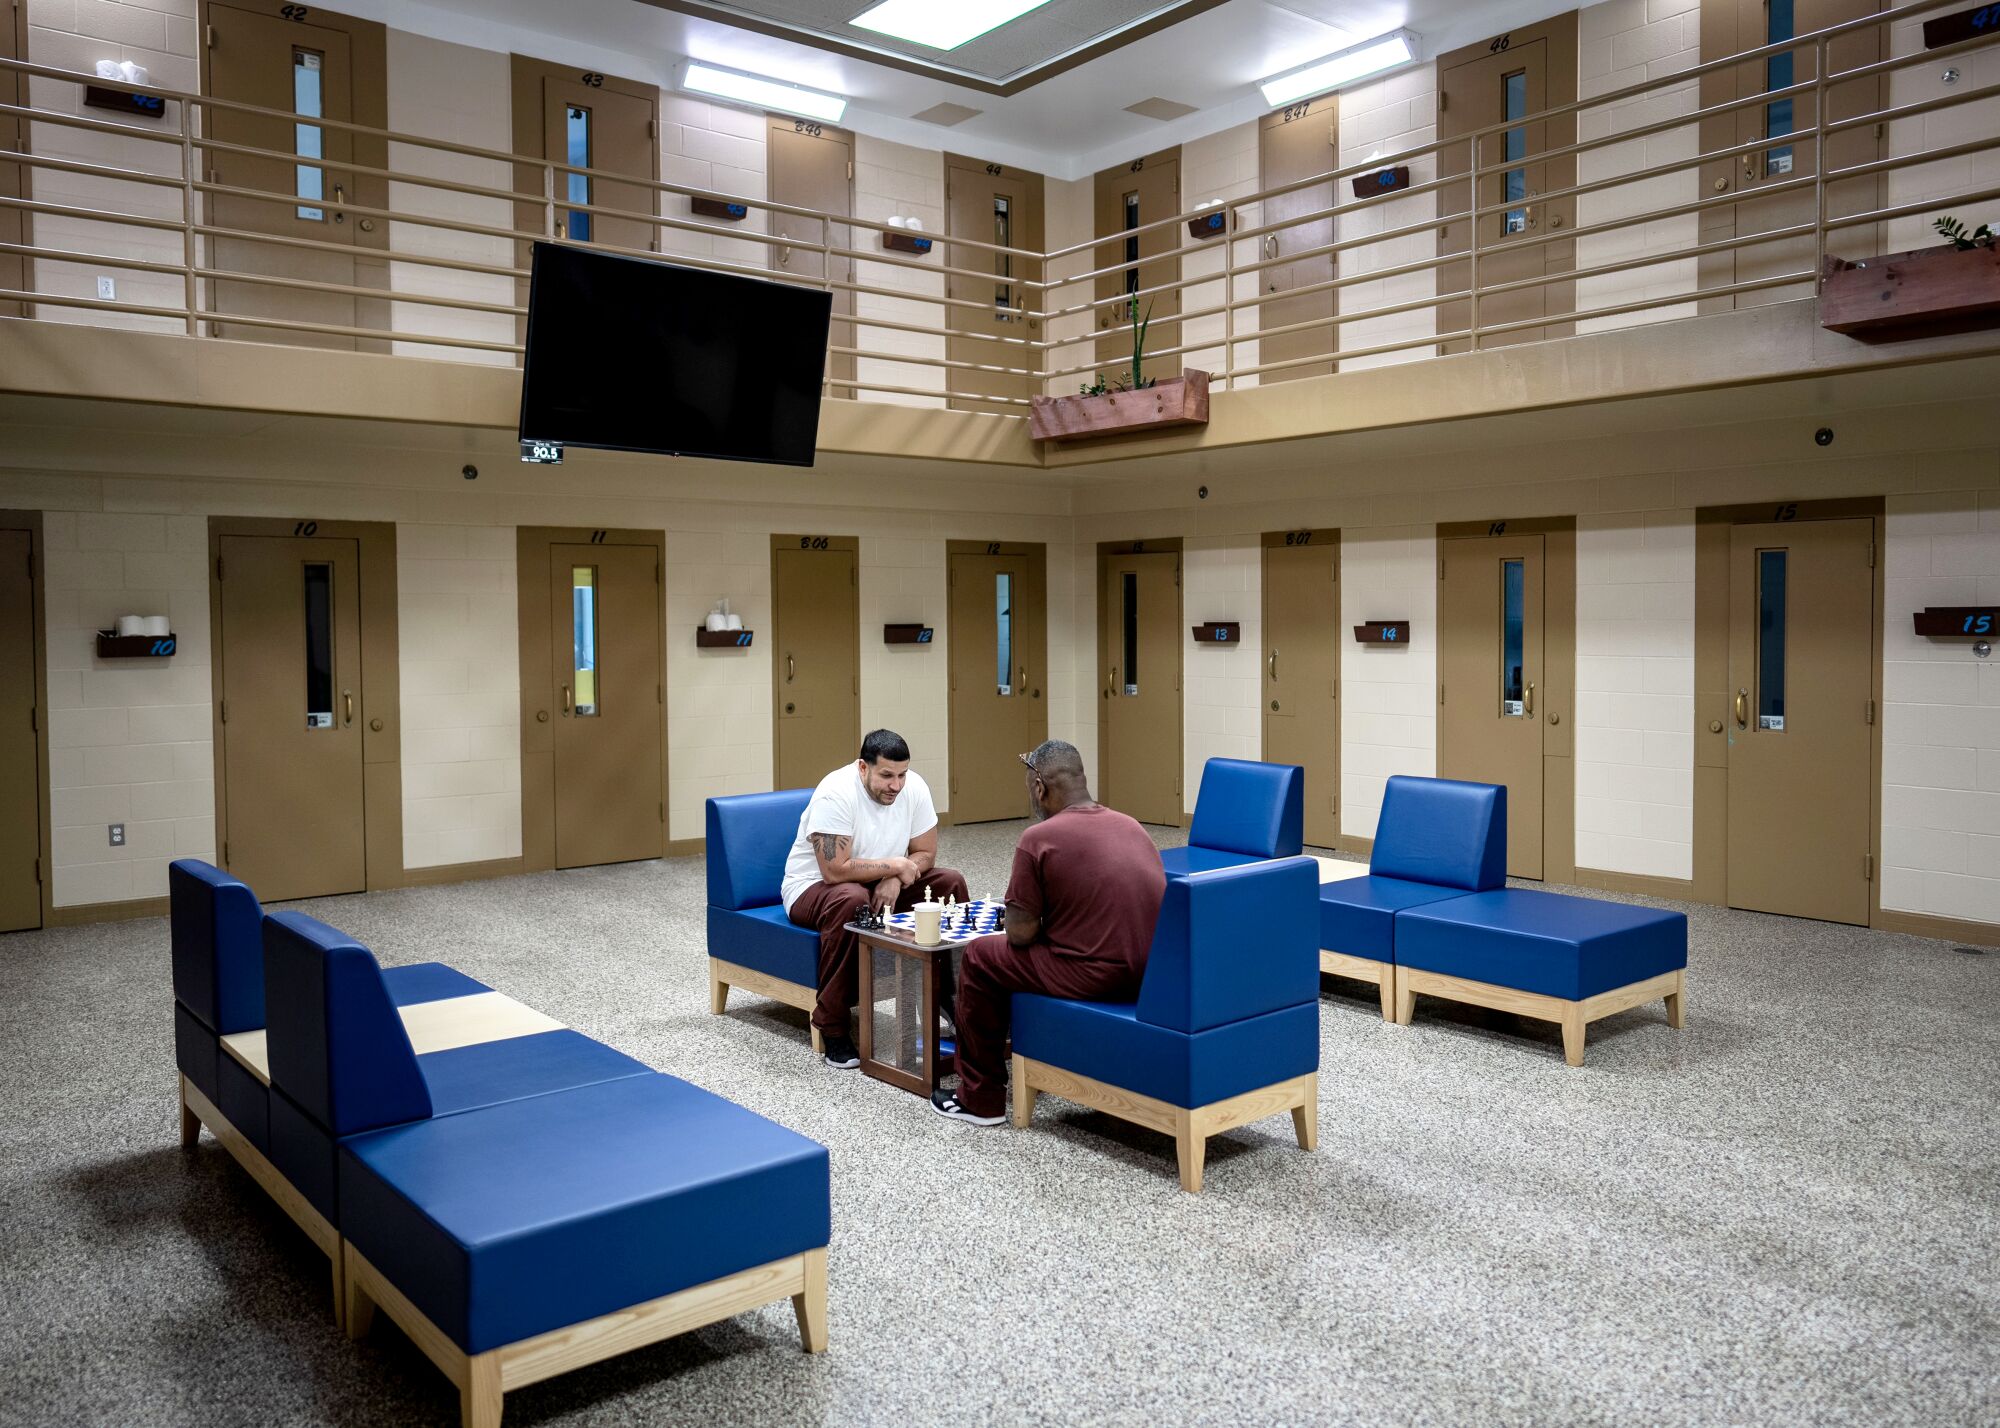 Two inmates sit in the middle of a prison block and play chess.  A television is mounted on the railing of the second floor of the cell units.